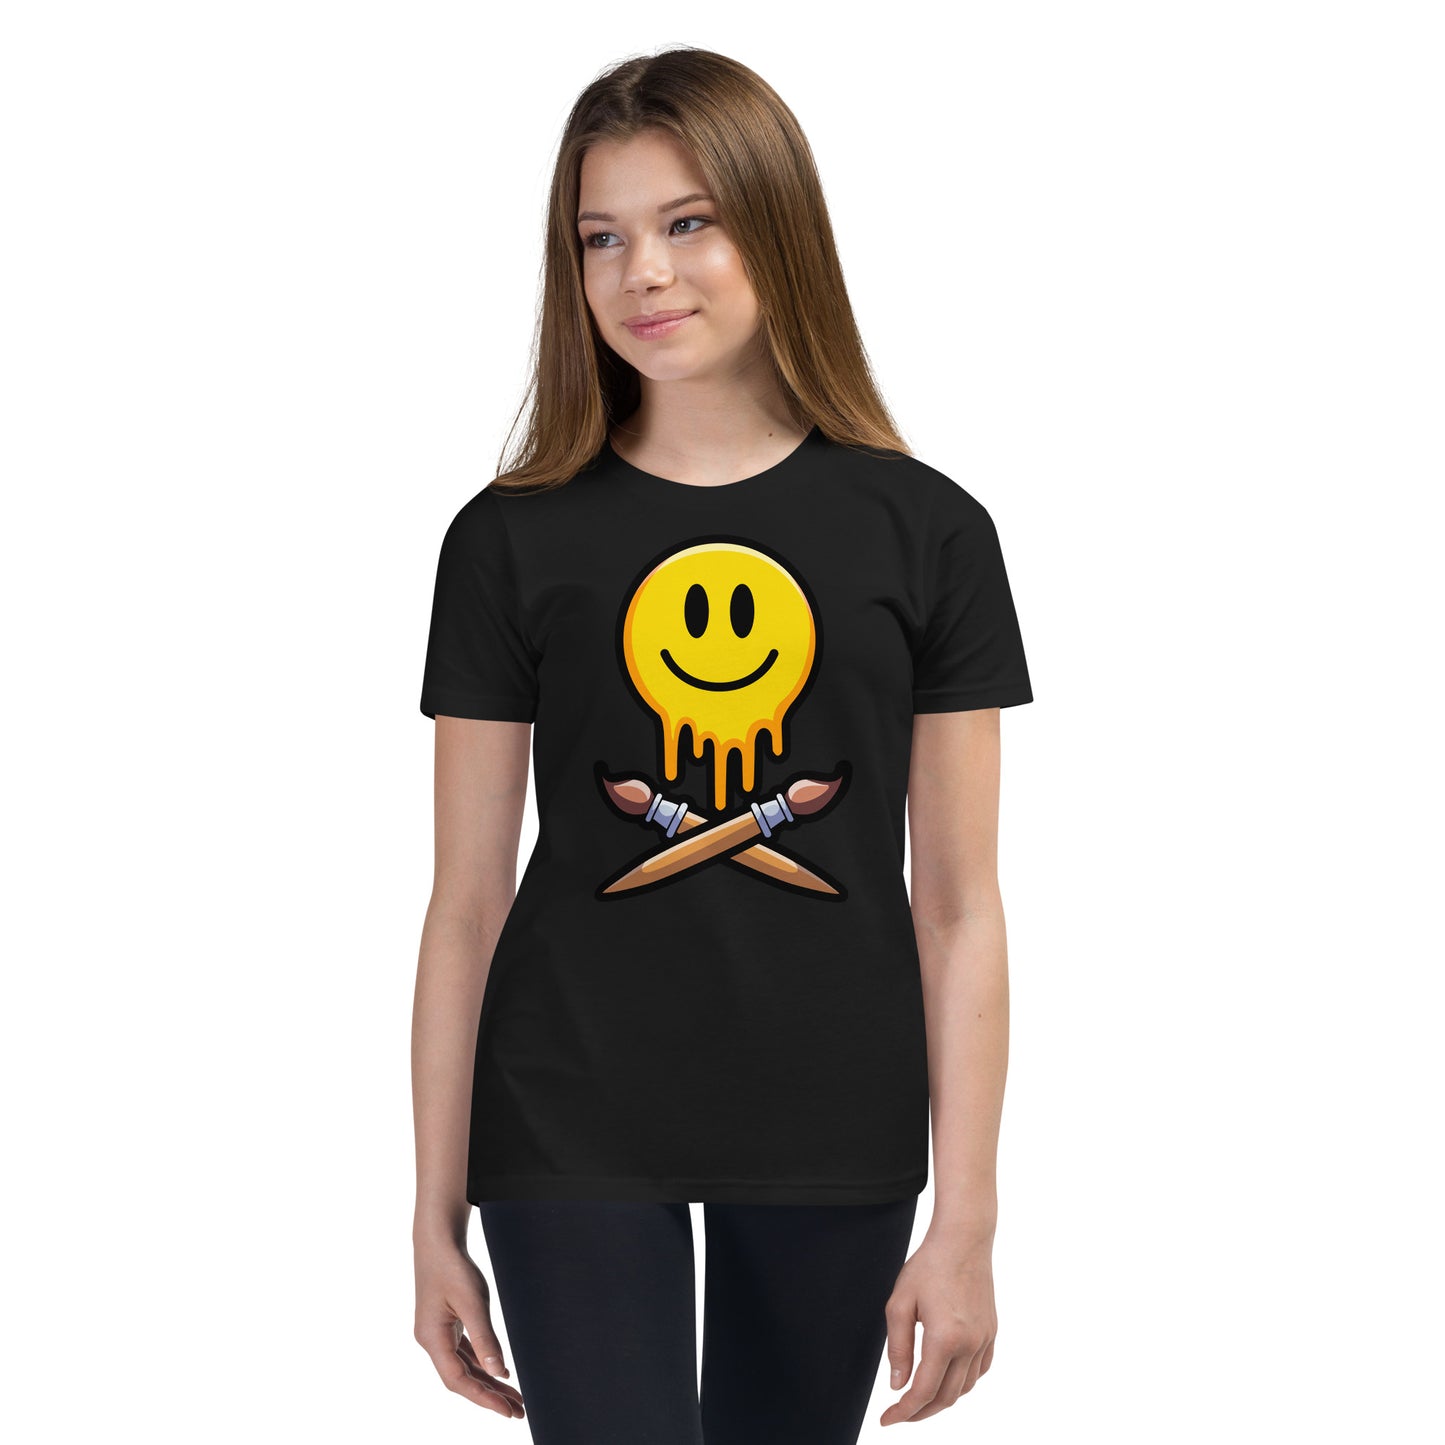 Clothing - The Grinning Painter Kids T-Shirt - Front Print